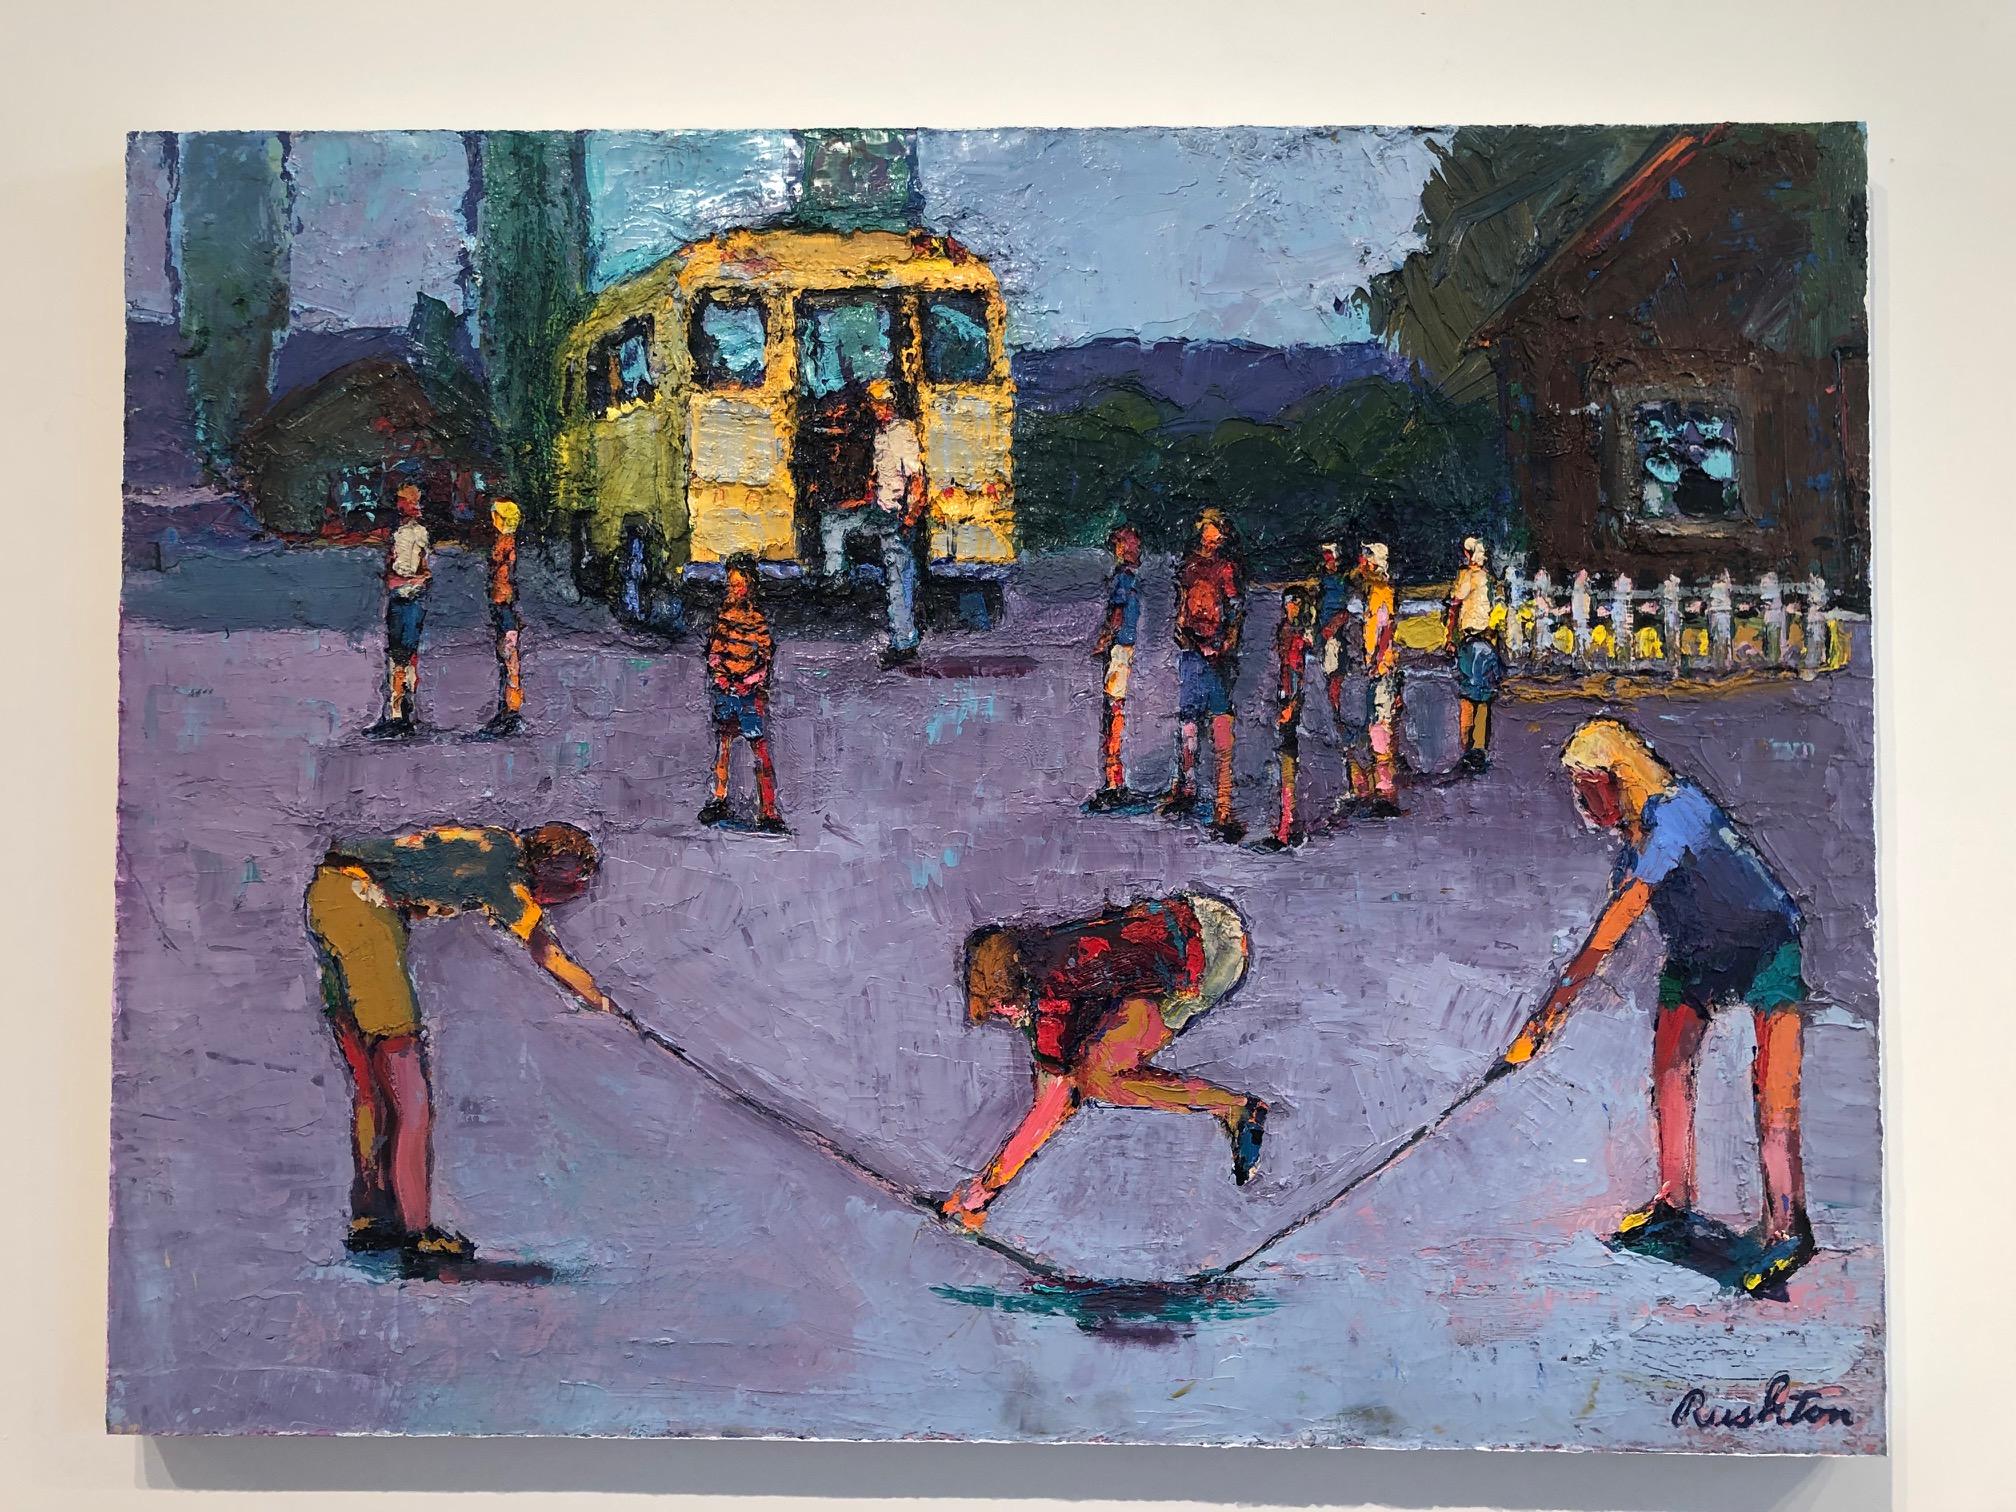 Flat Tire - children play and skip rope - oil on canvas - Contemporary Painting by William Rushton